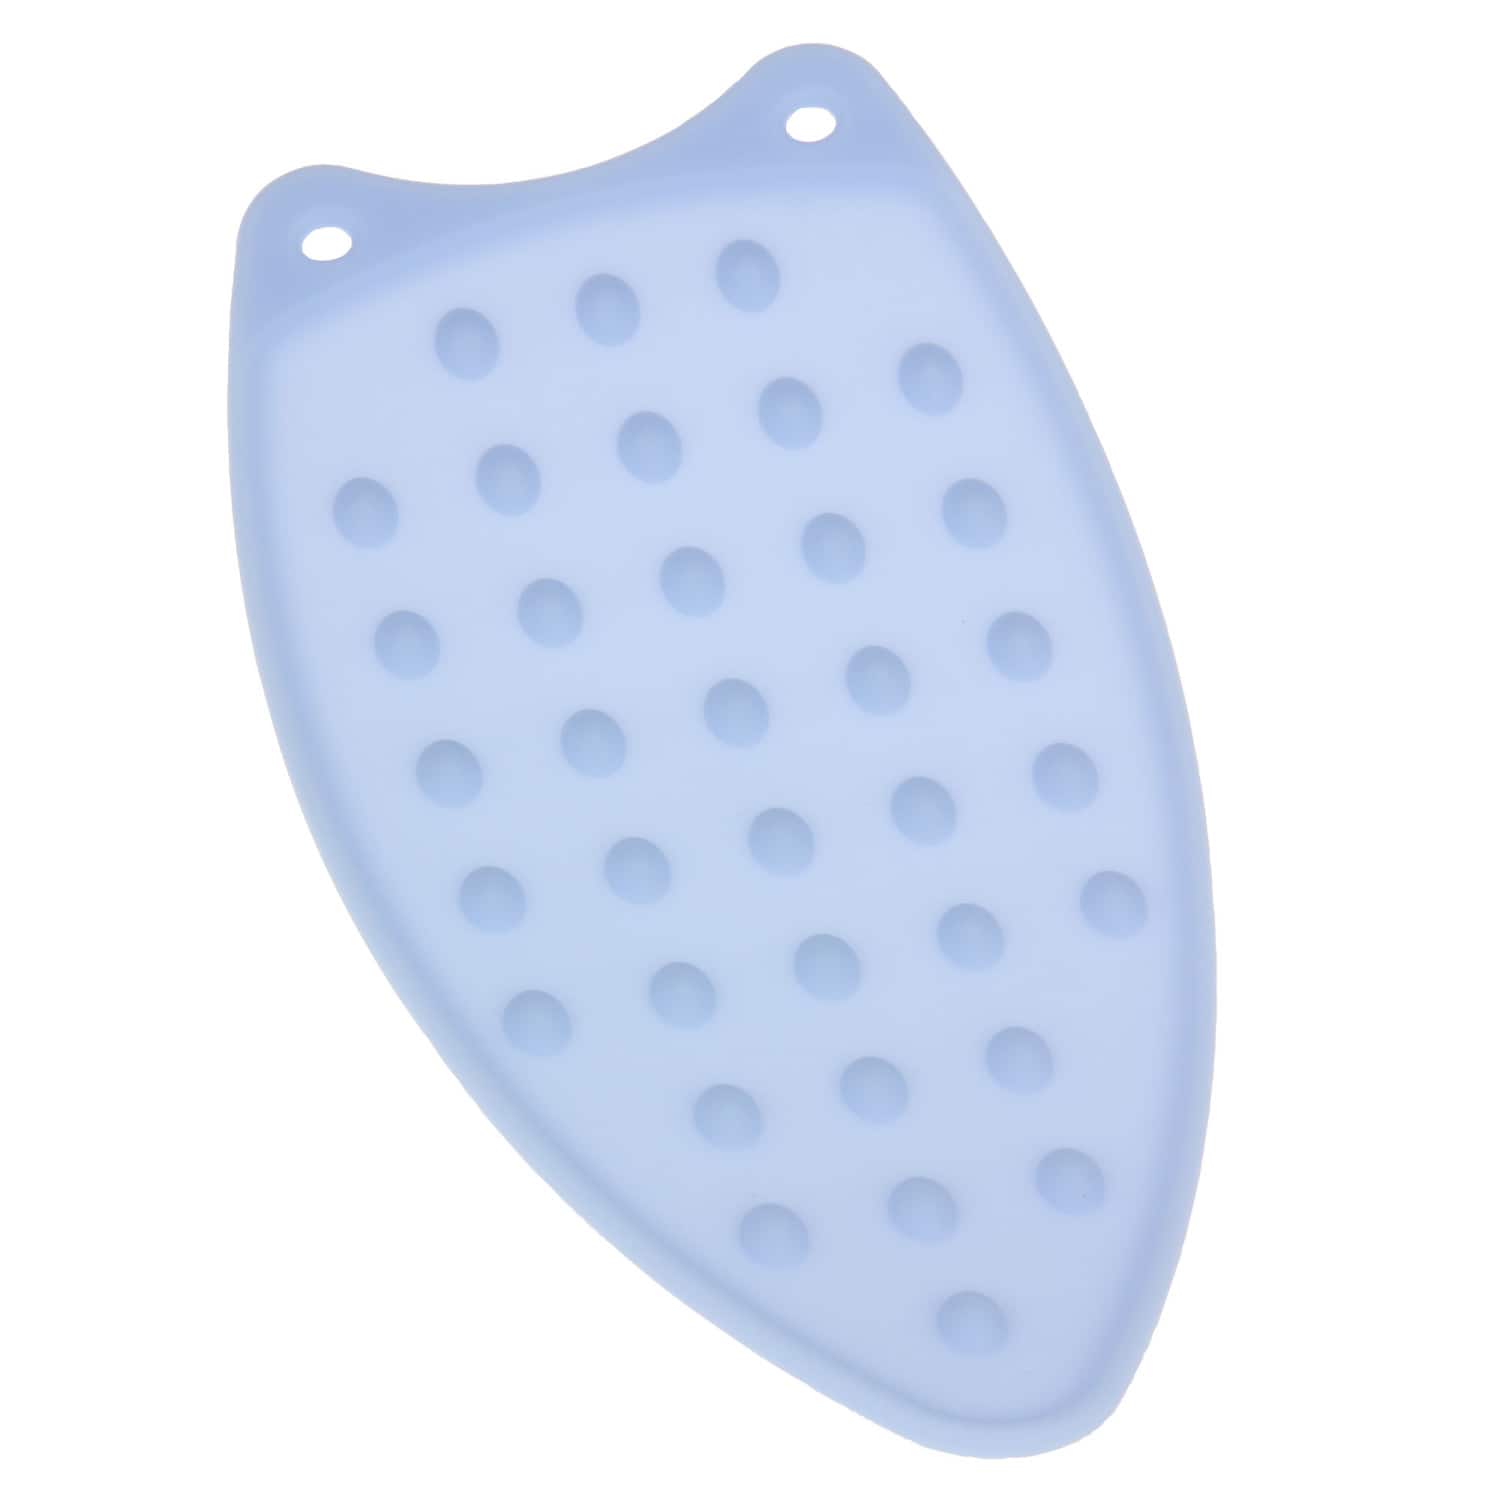 Household Essentials Blue Silicone Iron Rest Pad